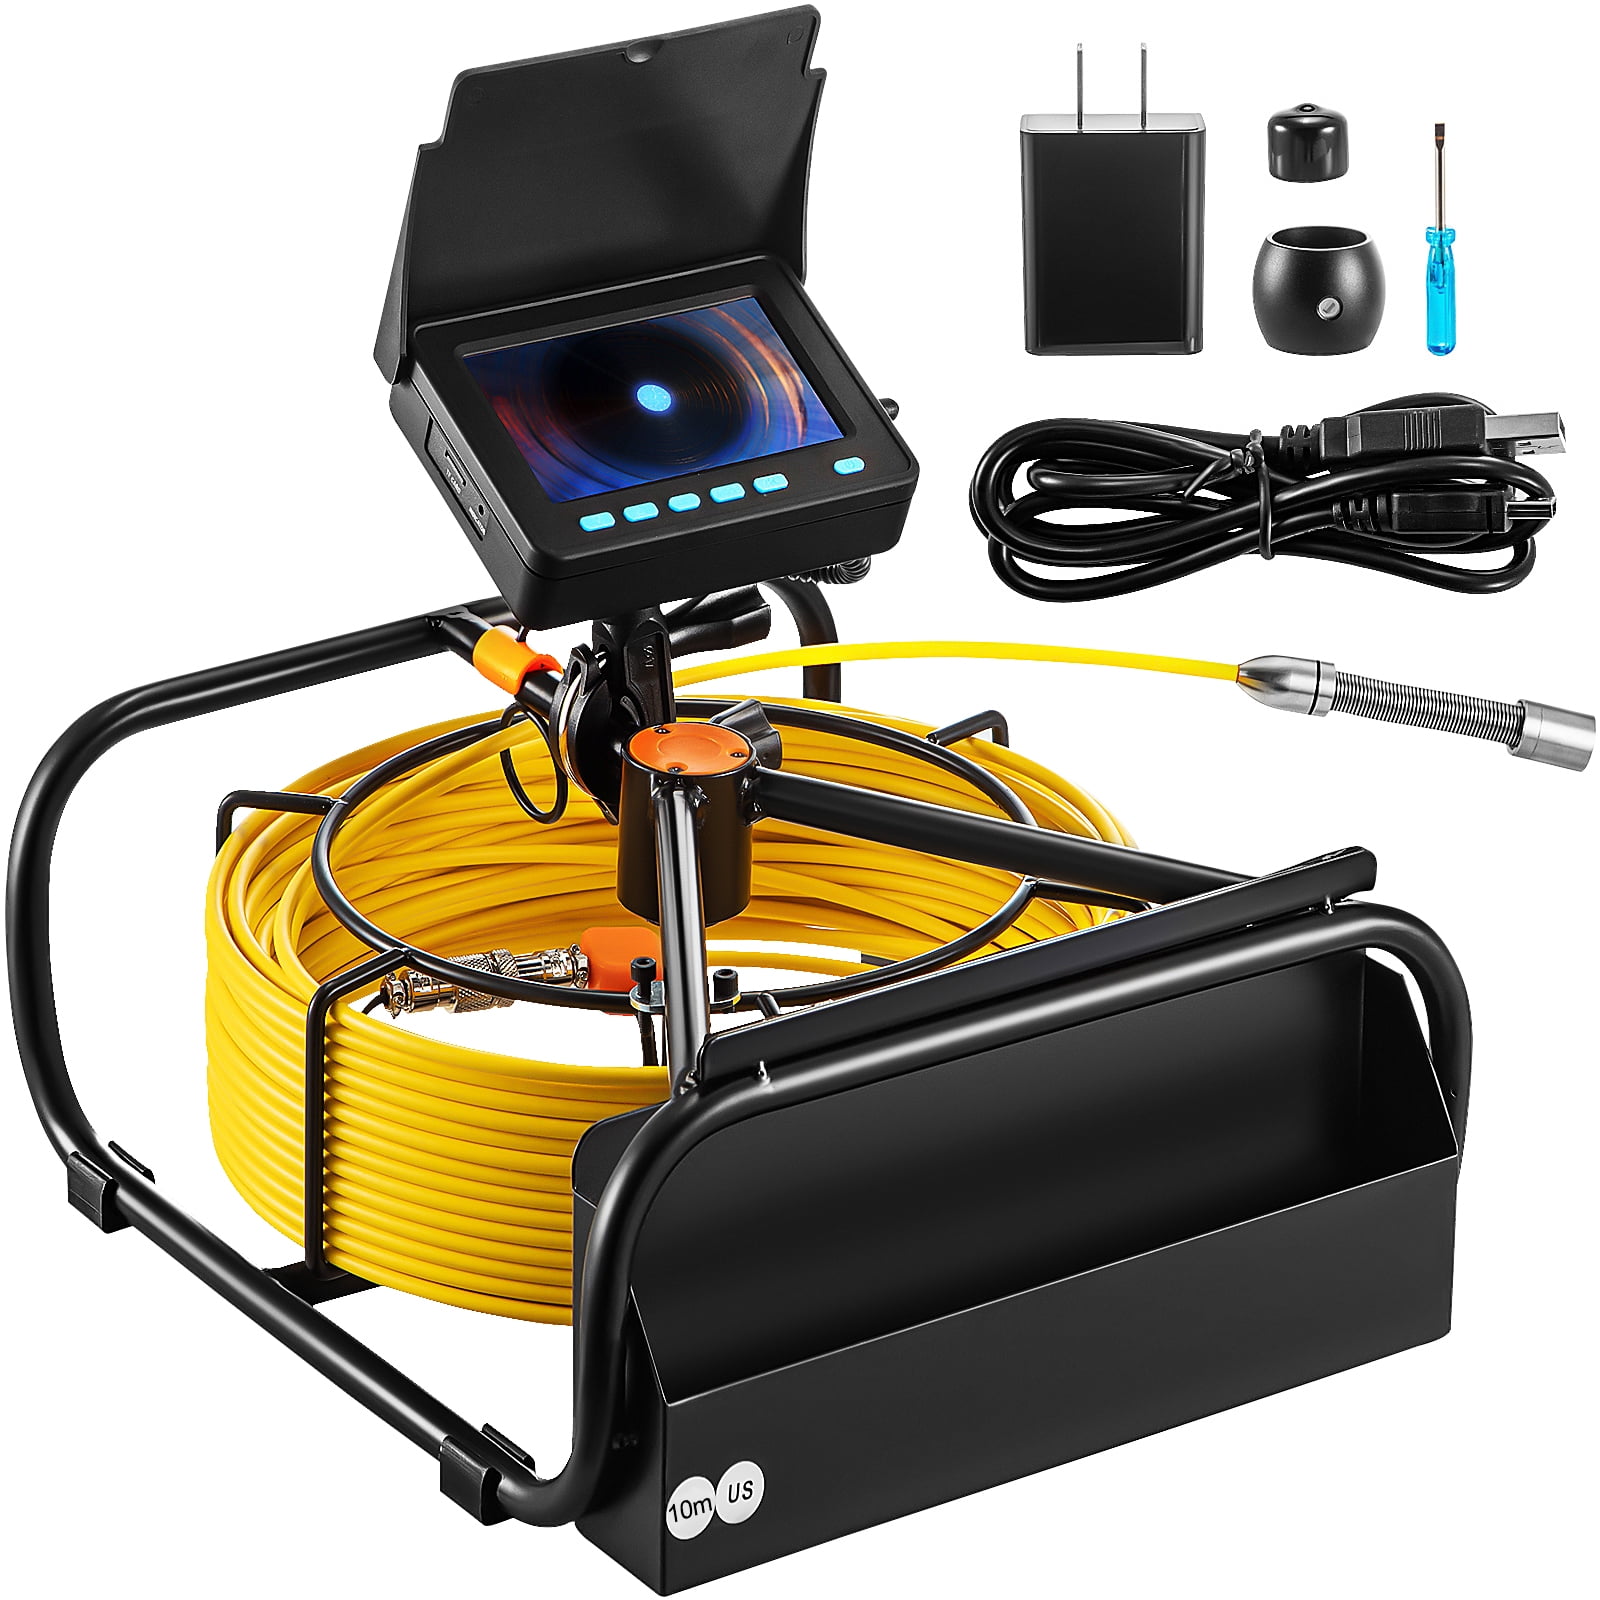 VEVOR Sewer Camera 30m/98.4ft, 4.3 in TFT LCD Monitor Screen Pipeline  Inspection Camera with DVR Function,Waterproof IP68 Pipe Camera ,6PCS LEDs 